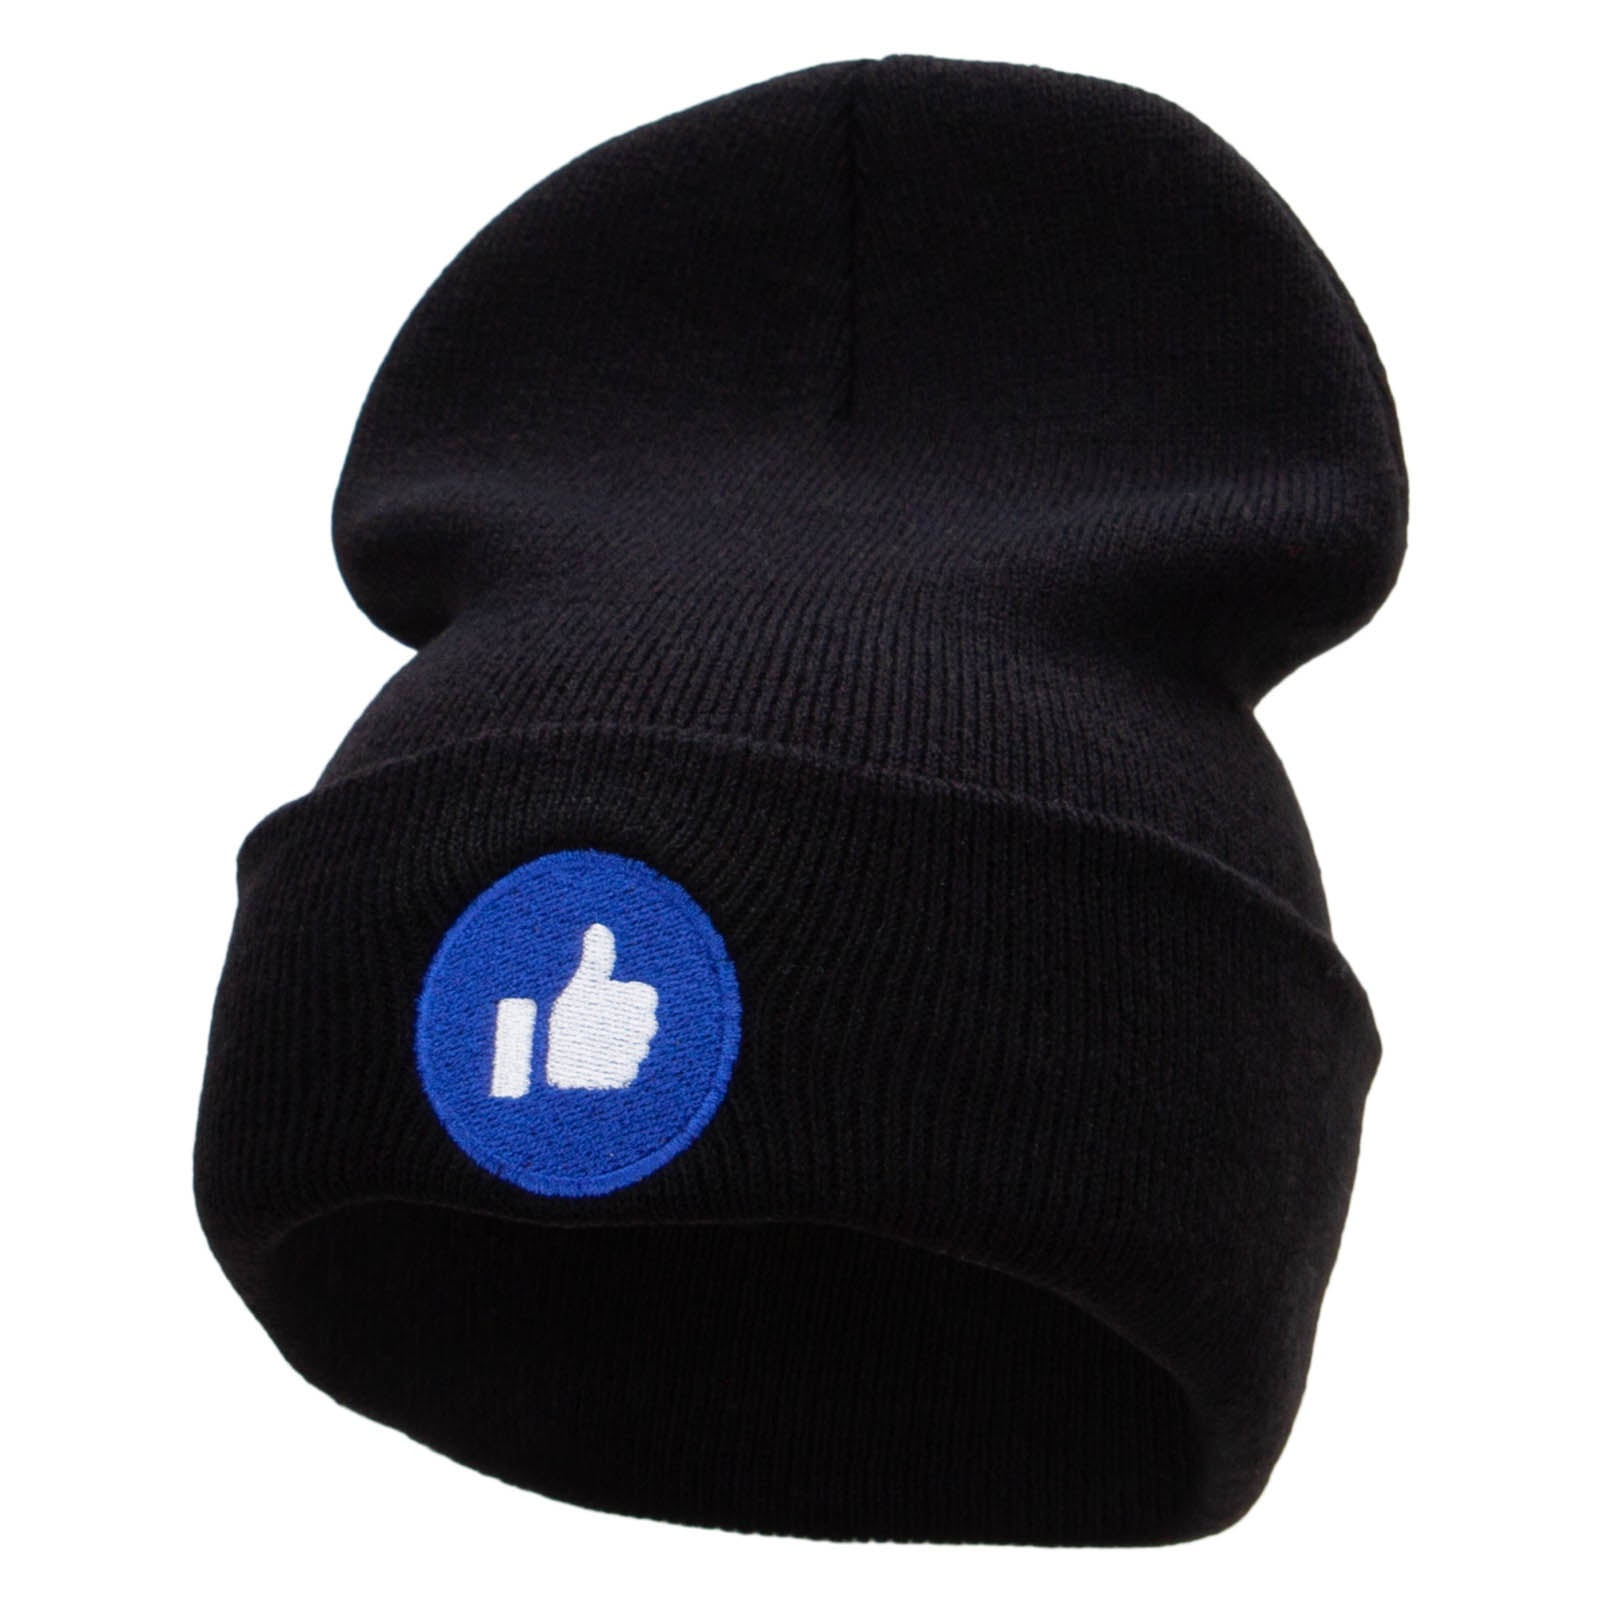 Give Thumbs Up Embroidered 12 Inch Long Knitted Beanie - Black OSFM